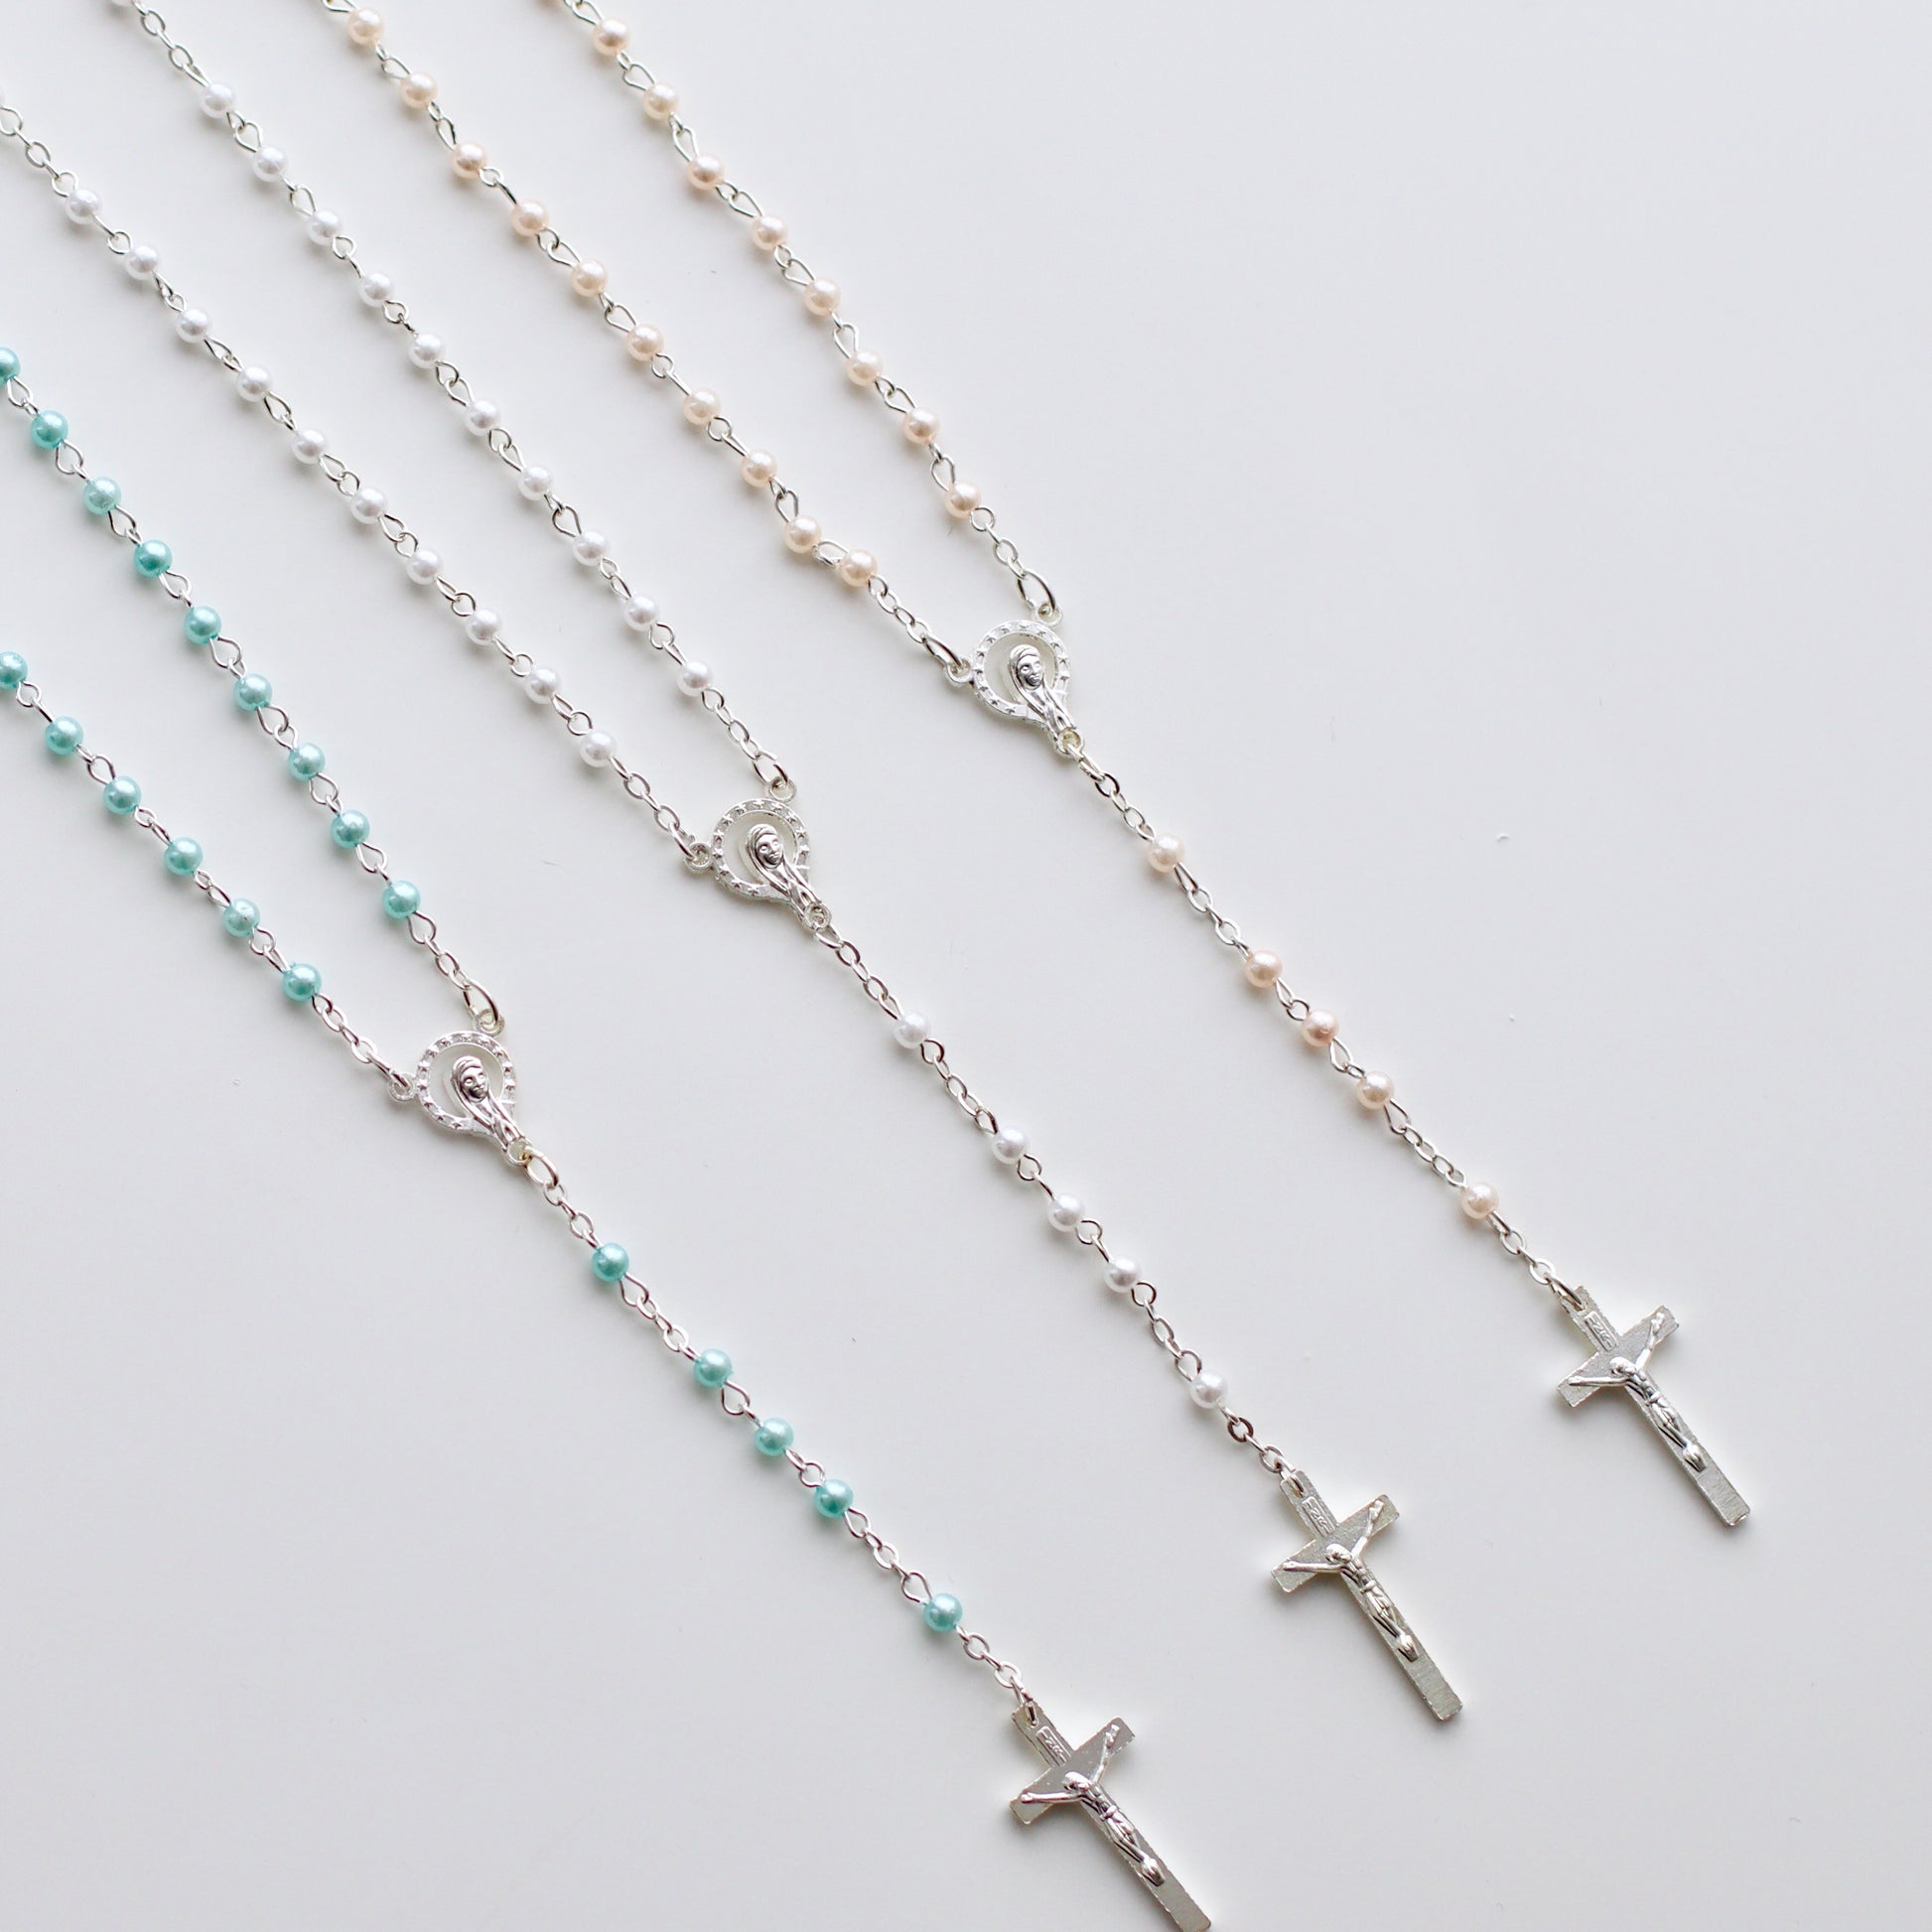 Babies First Rosary, perfect as a gift for a baptism or christening, or a communion gift